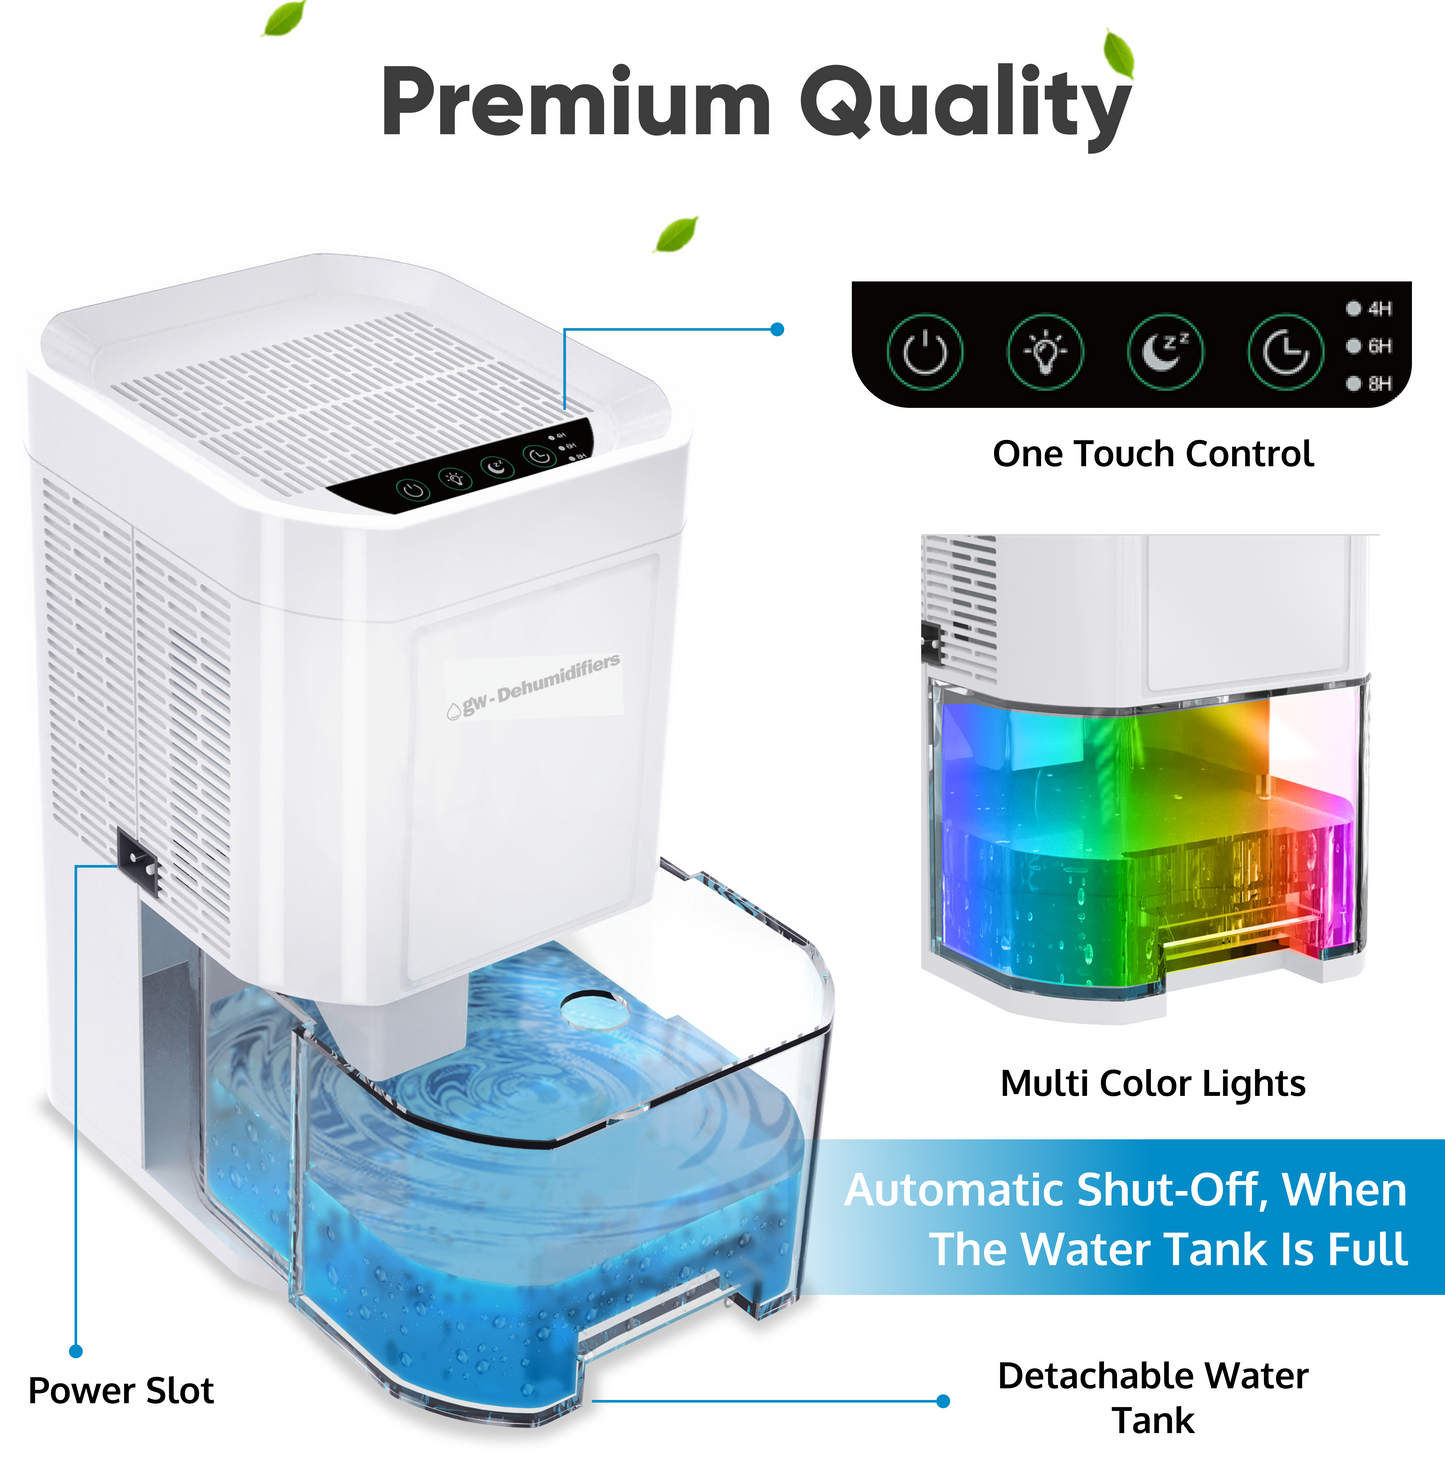 1000ml Gw-Dehumidifiers for Home Damp - Sleep Mode &amp; 7 Timer Options - Quiet Dehumidifier for Bedroom - Portable &amp; Auto Turn Off -Energy Efficient for Drying Clothes, Mildew Prevention &amp;Bathroom